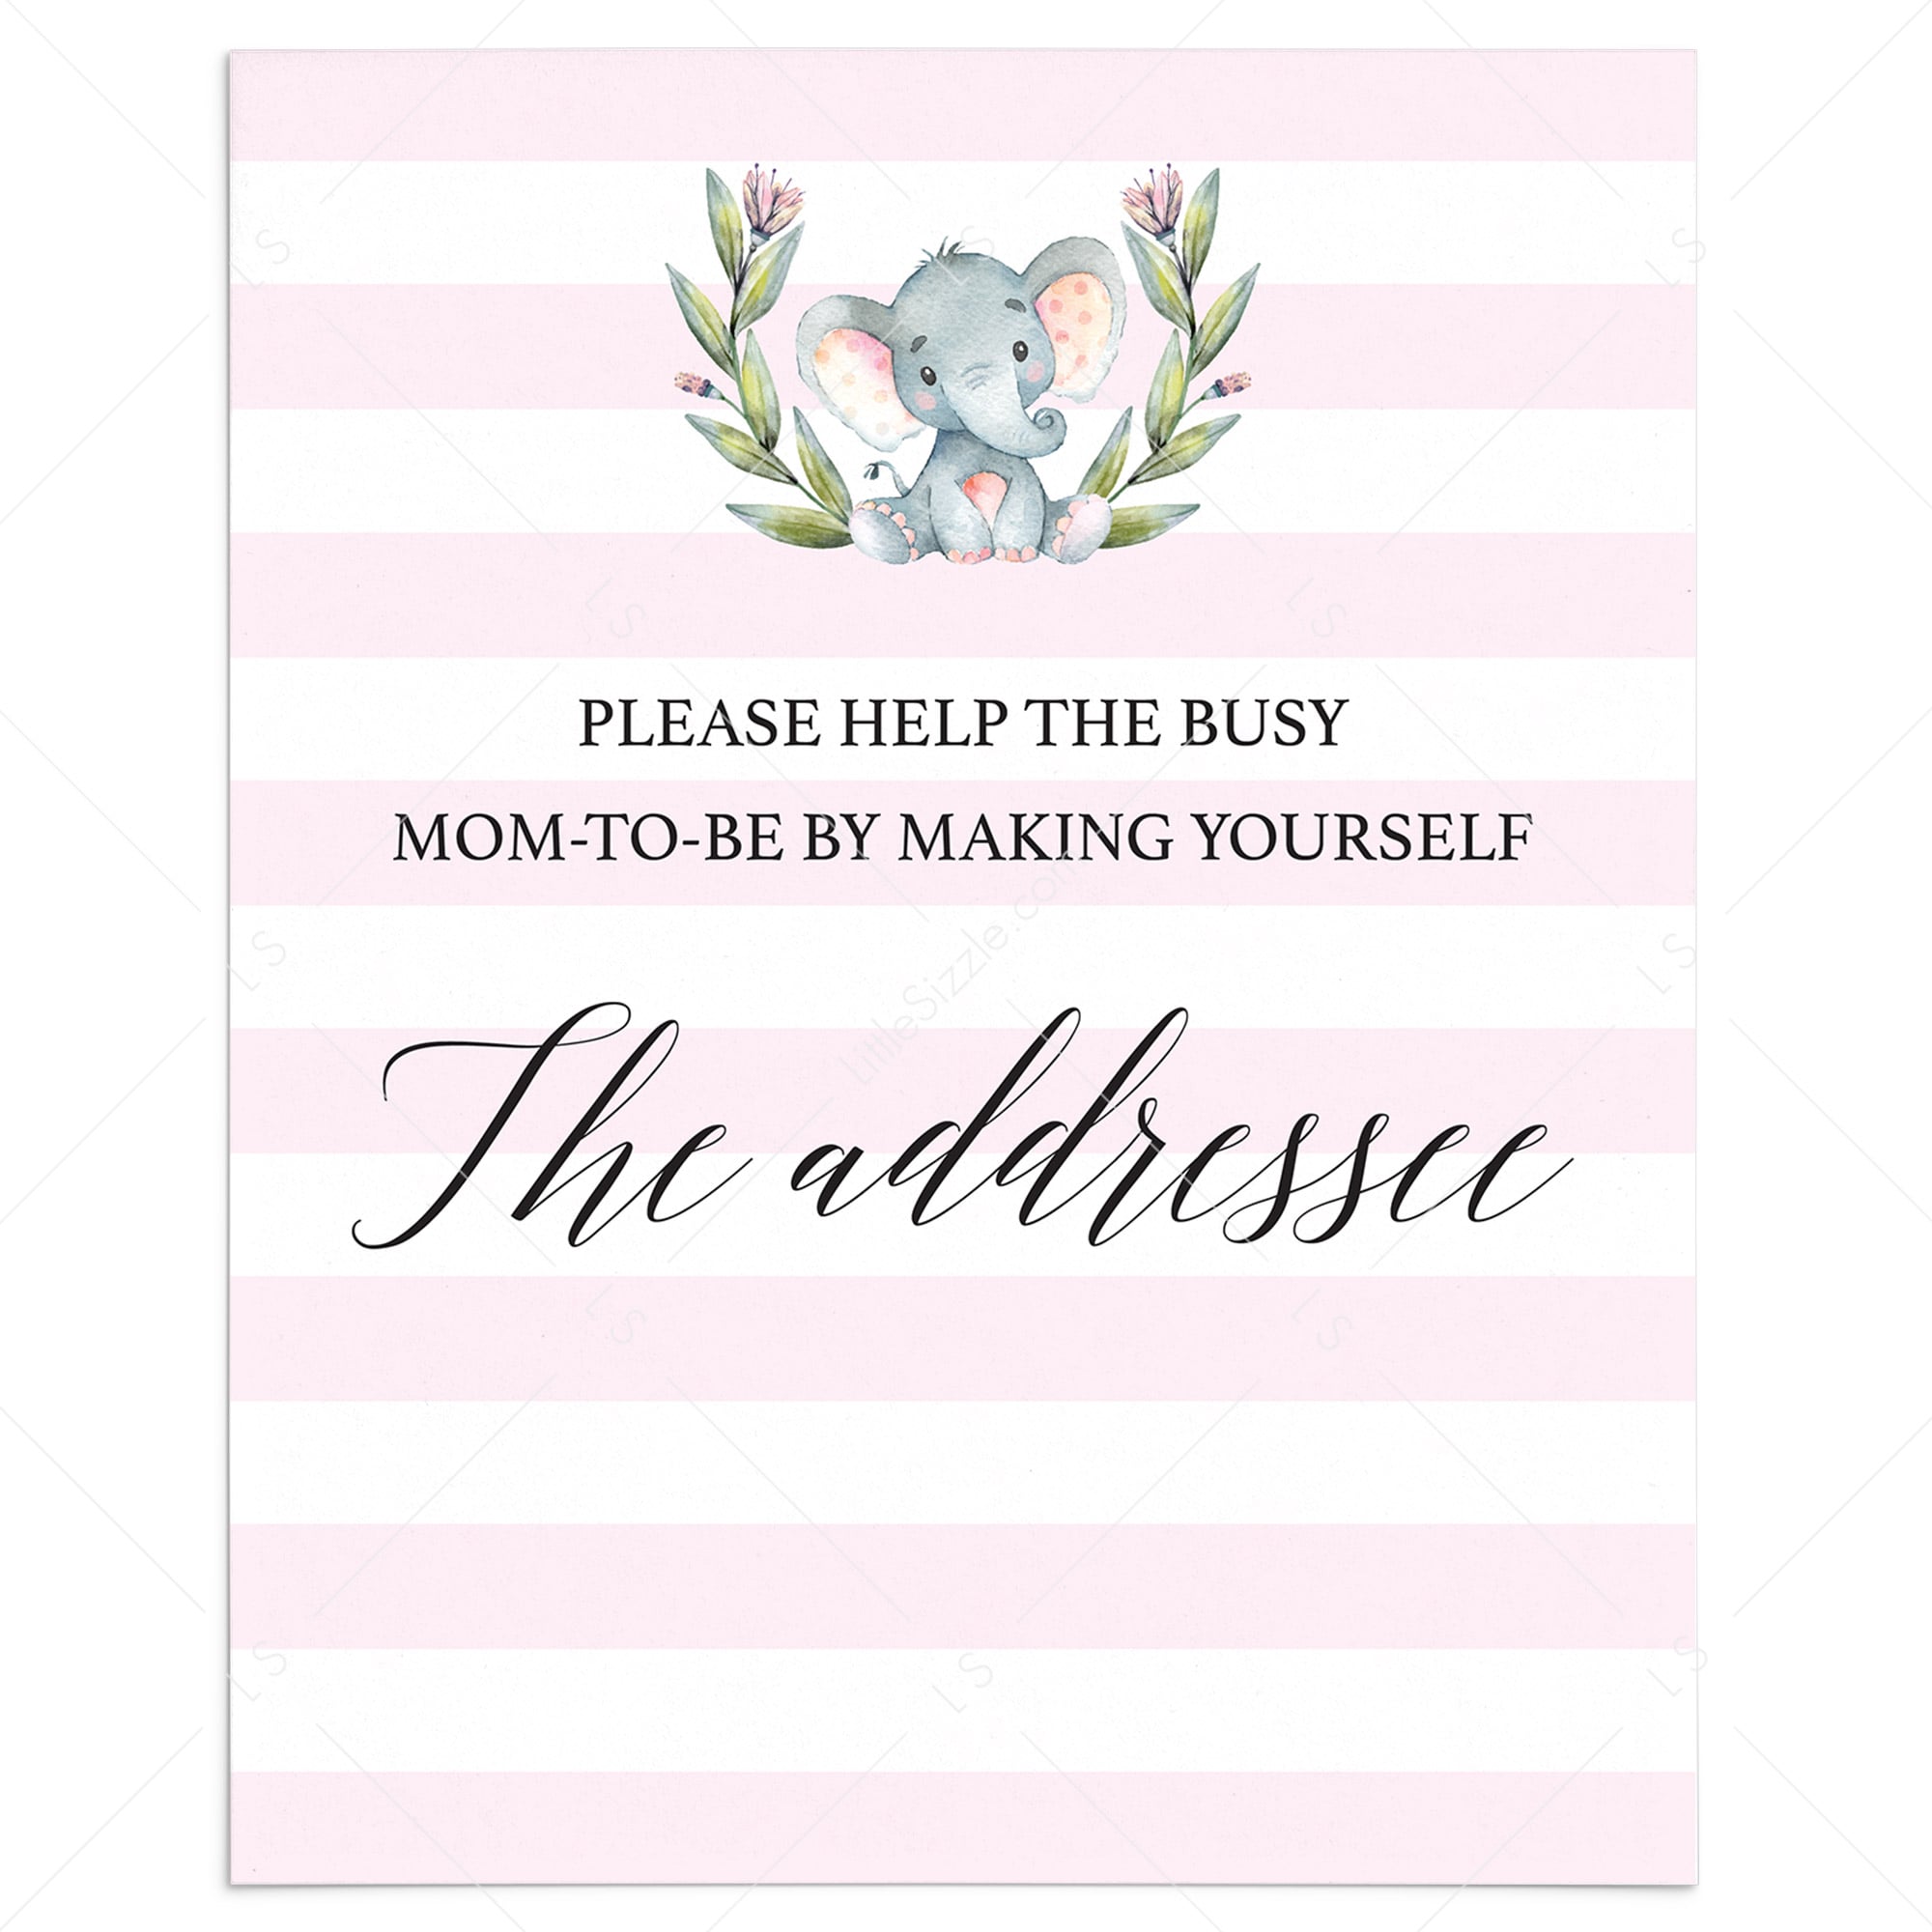 Addressee sign for baby shower pink and white by LittleSizzle